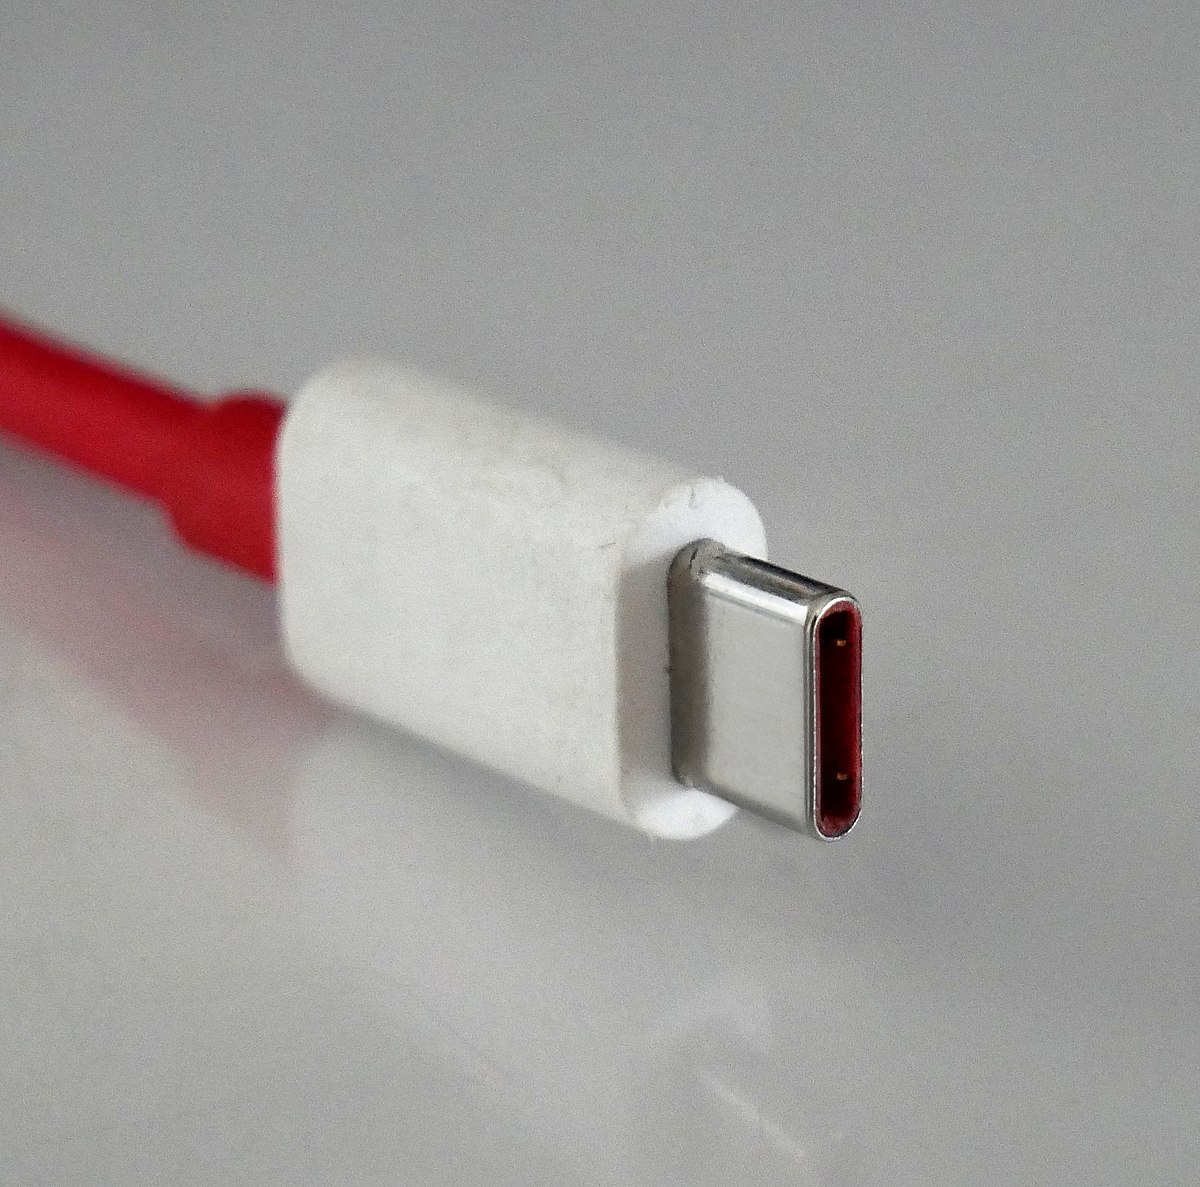 Apple Will Soon Give Up Resisting USB-C Chargers for iPhone